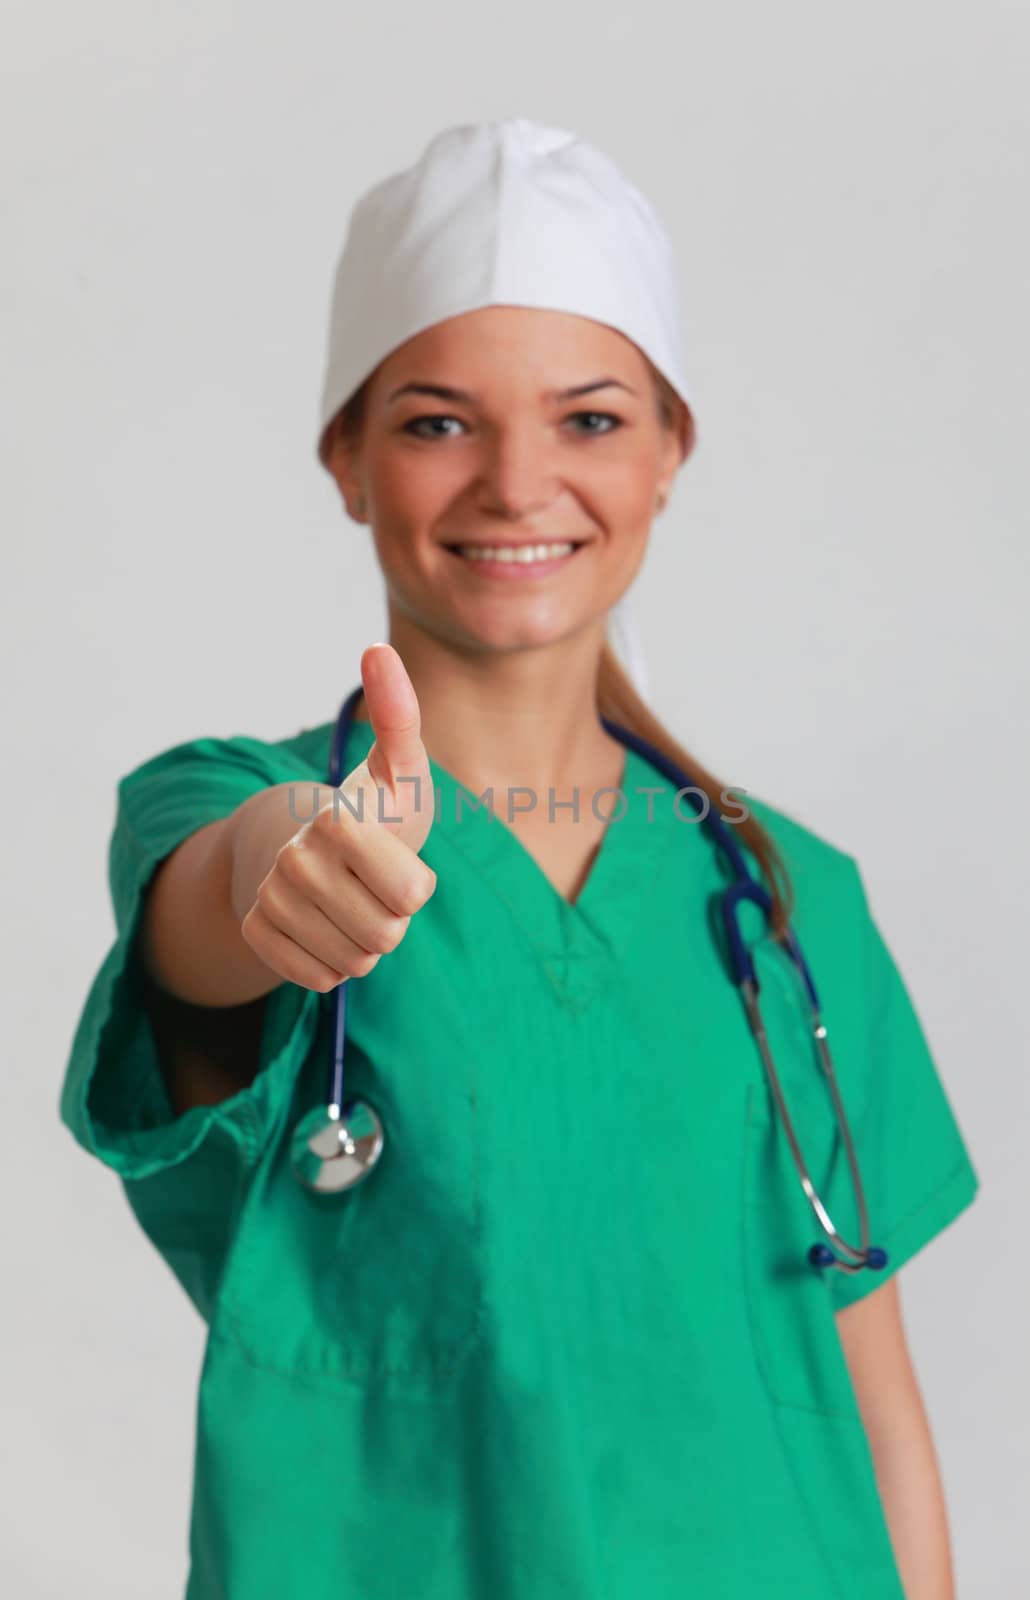 Portrait of a smiling young woman doctor with her right thumb up, against a gray background. Selective focus on the thumb.